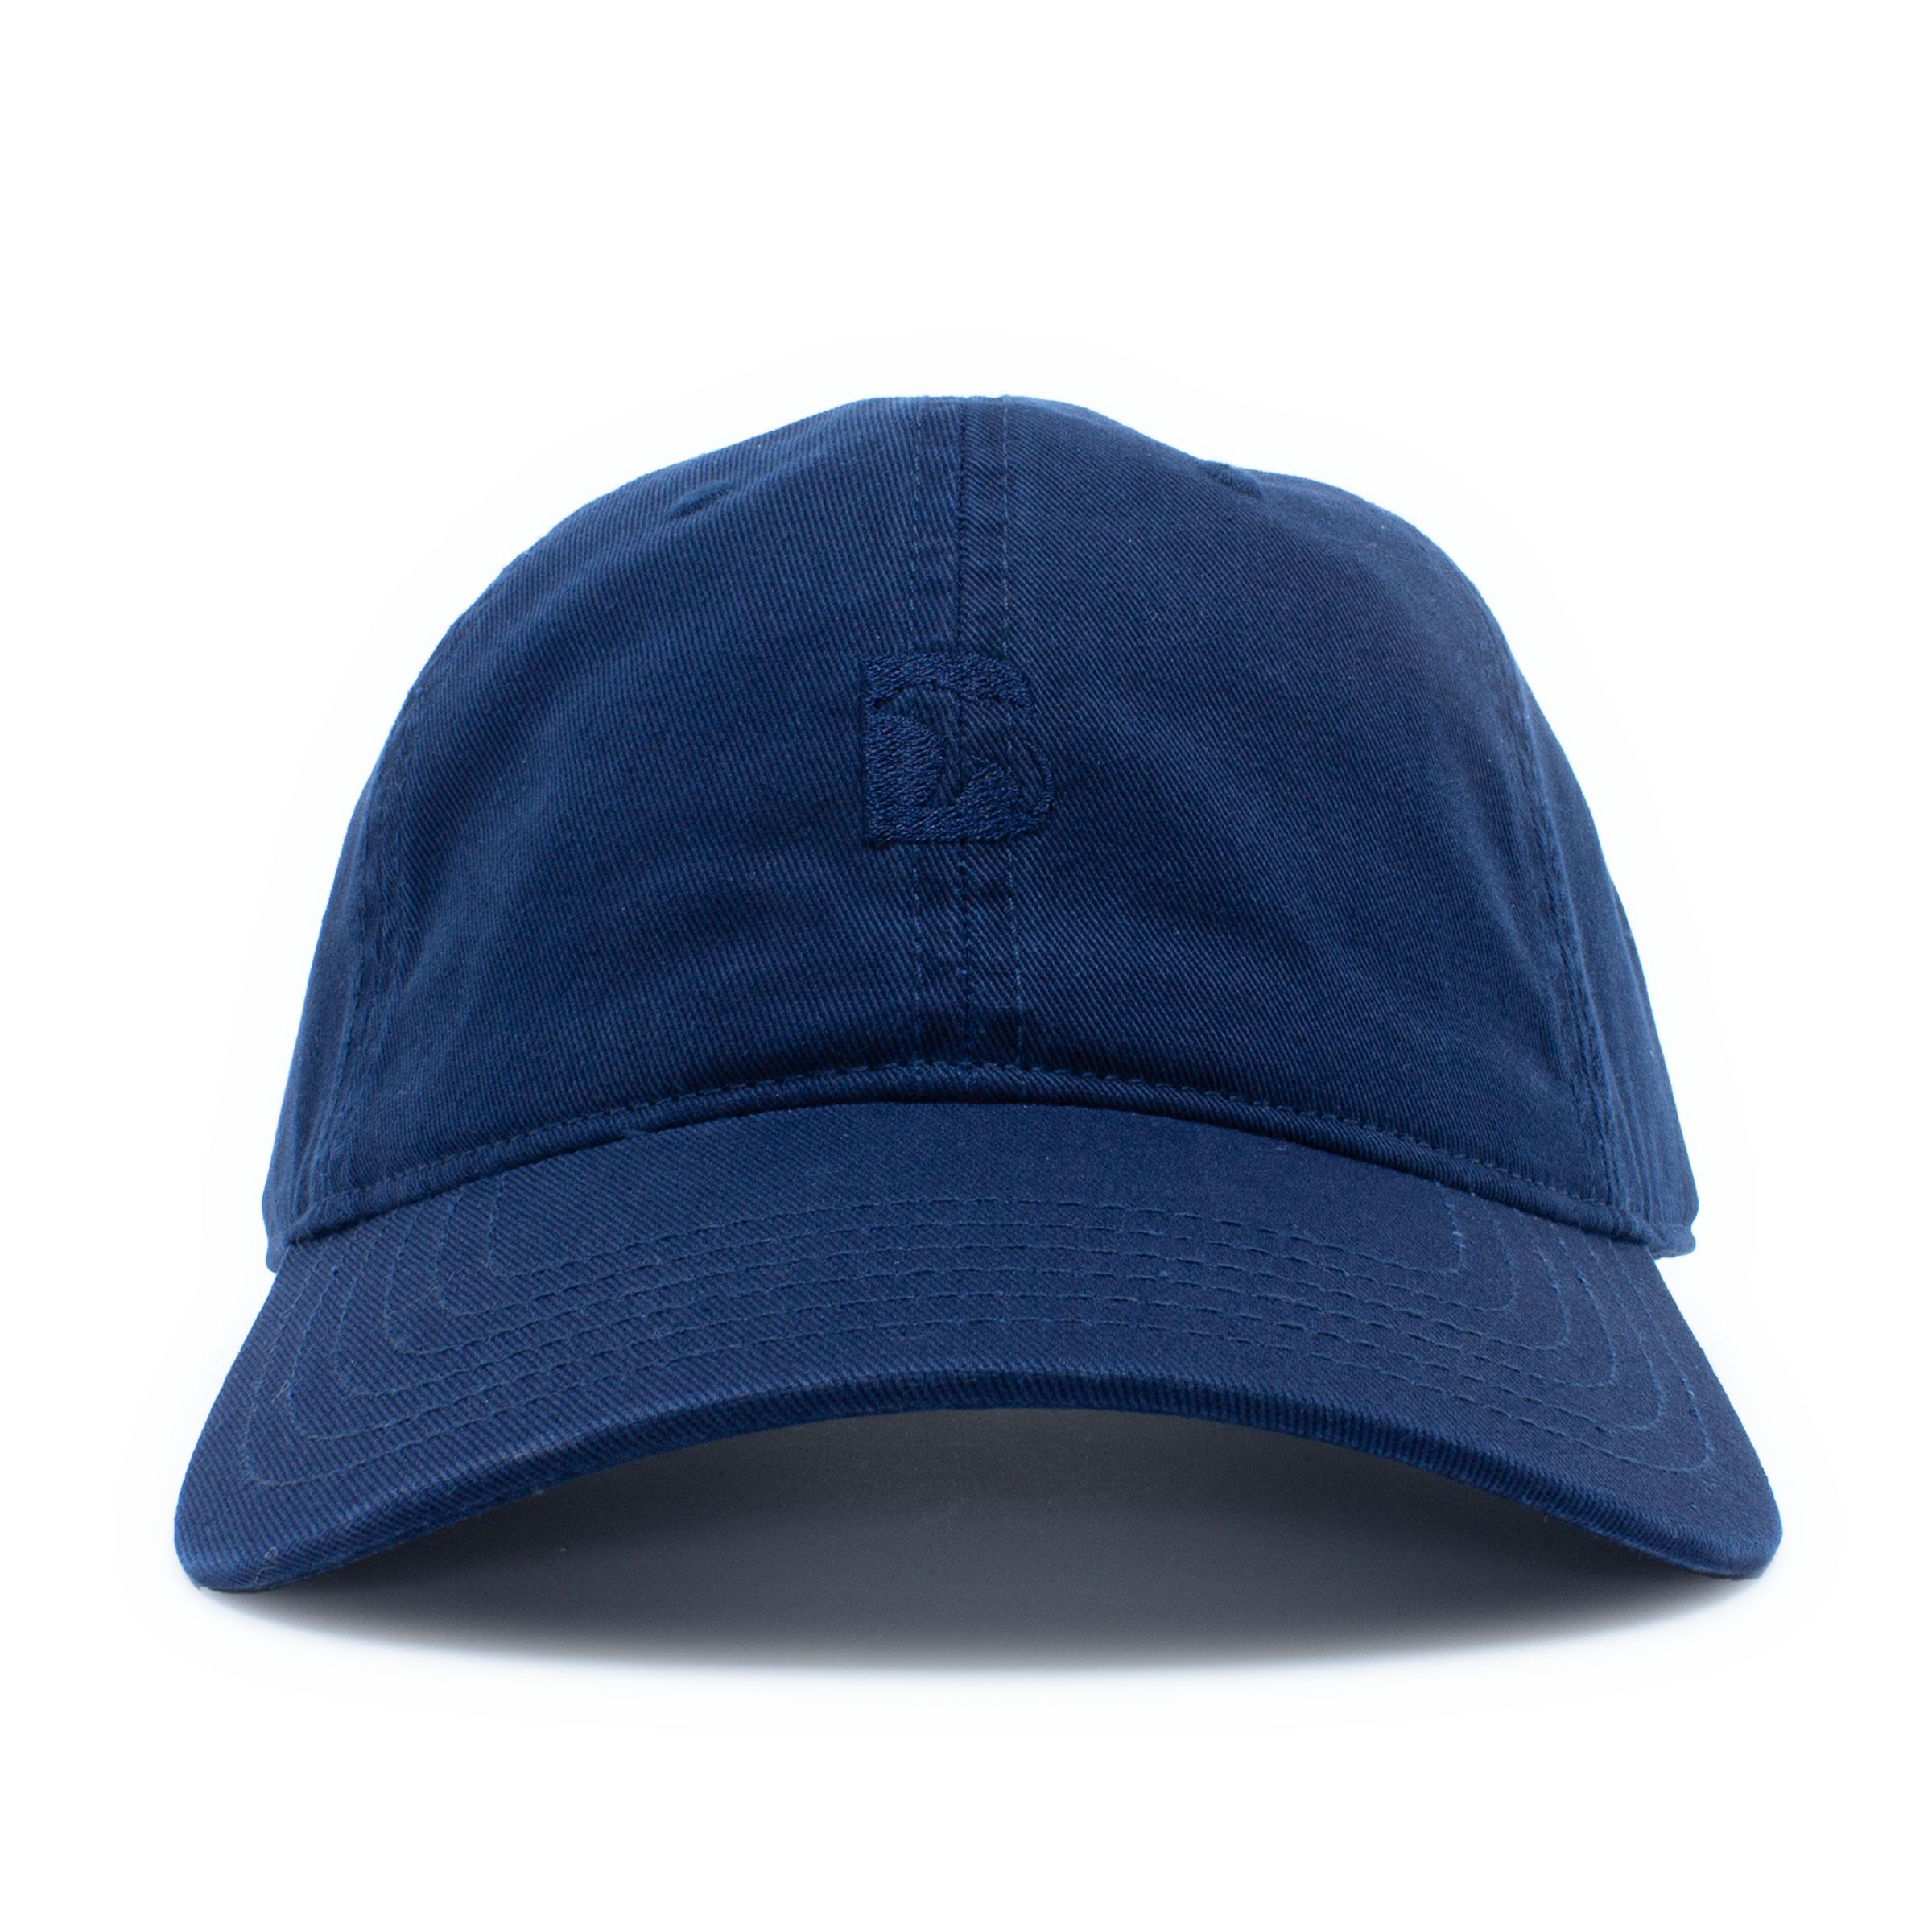 Bearbottom Dad Hat Navy front embroidered B logo